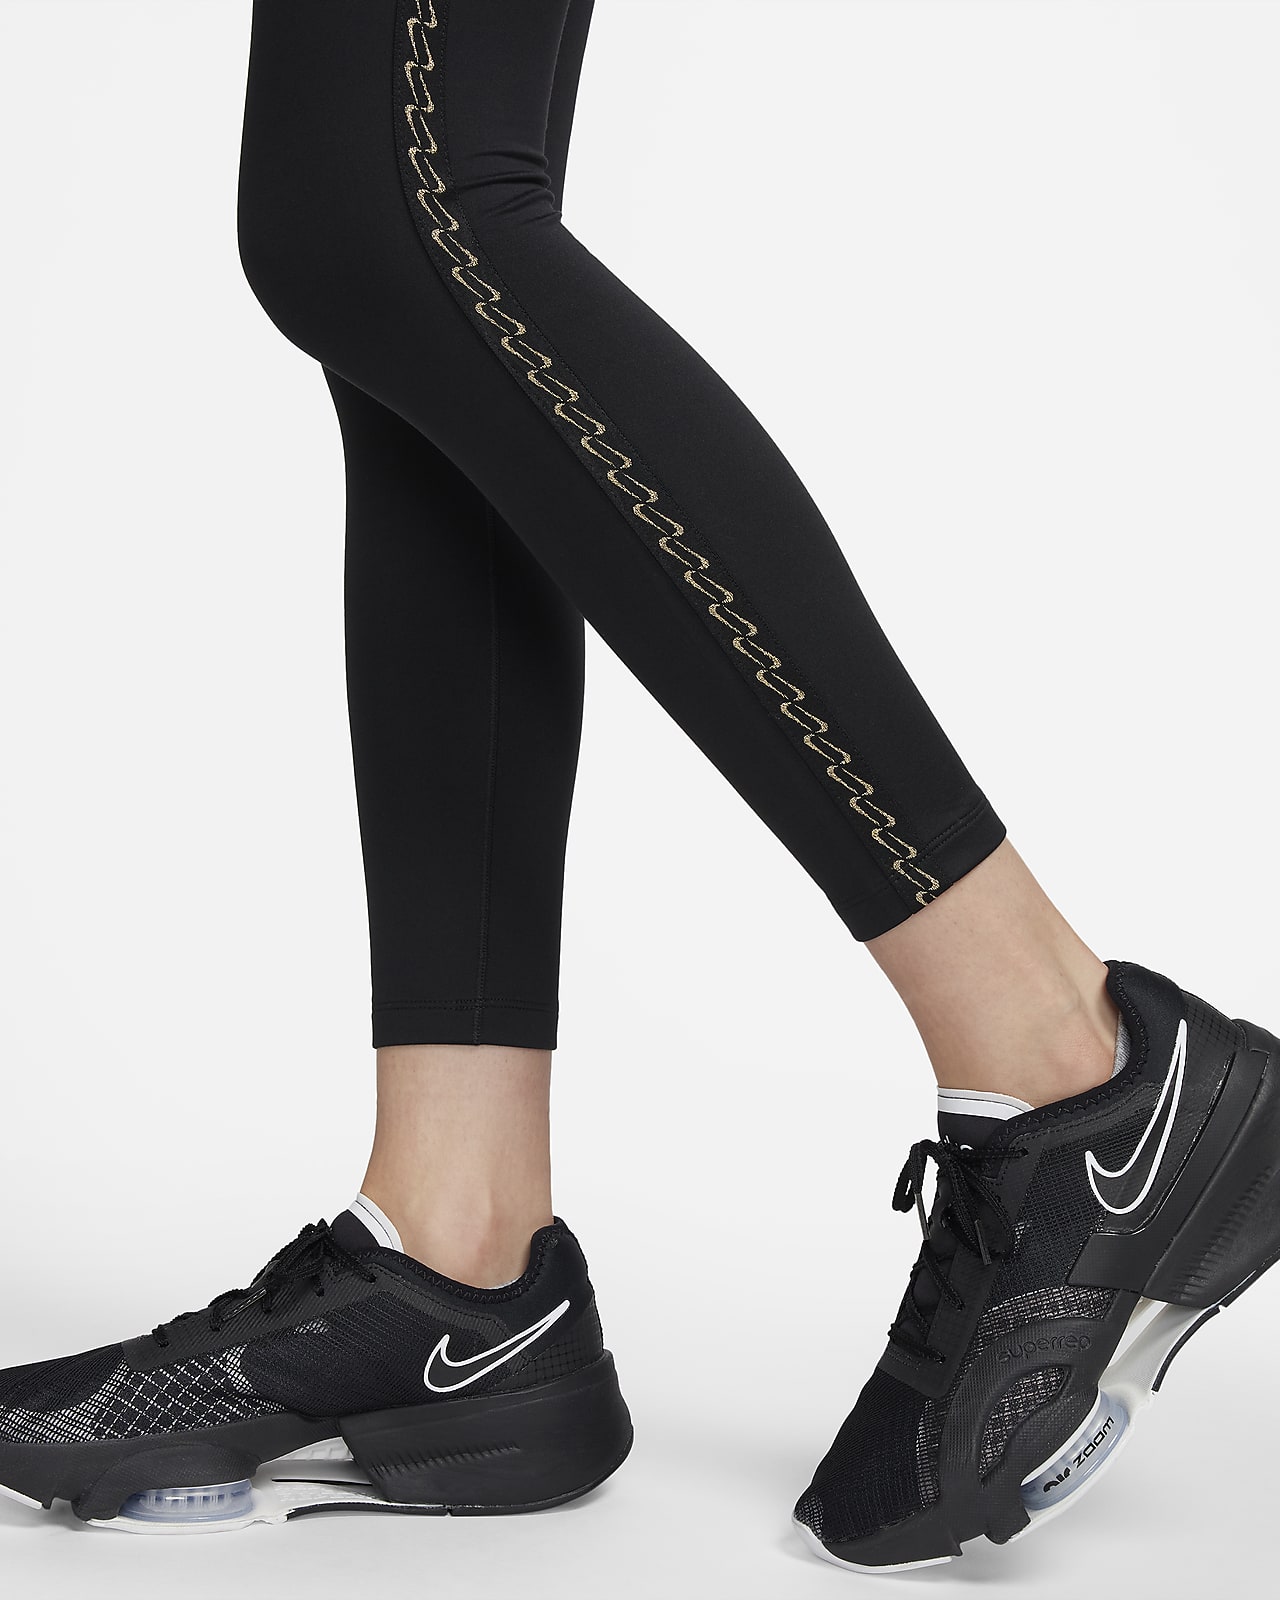 Nike One Women's Therma-FIT High-Waisted 7/8 Leggings